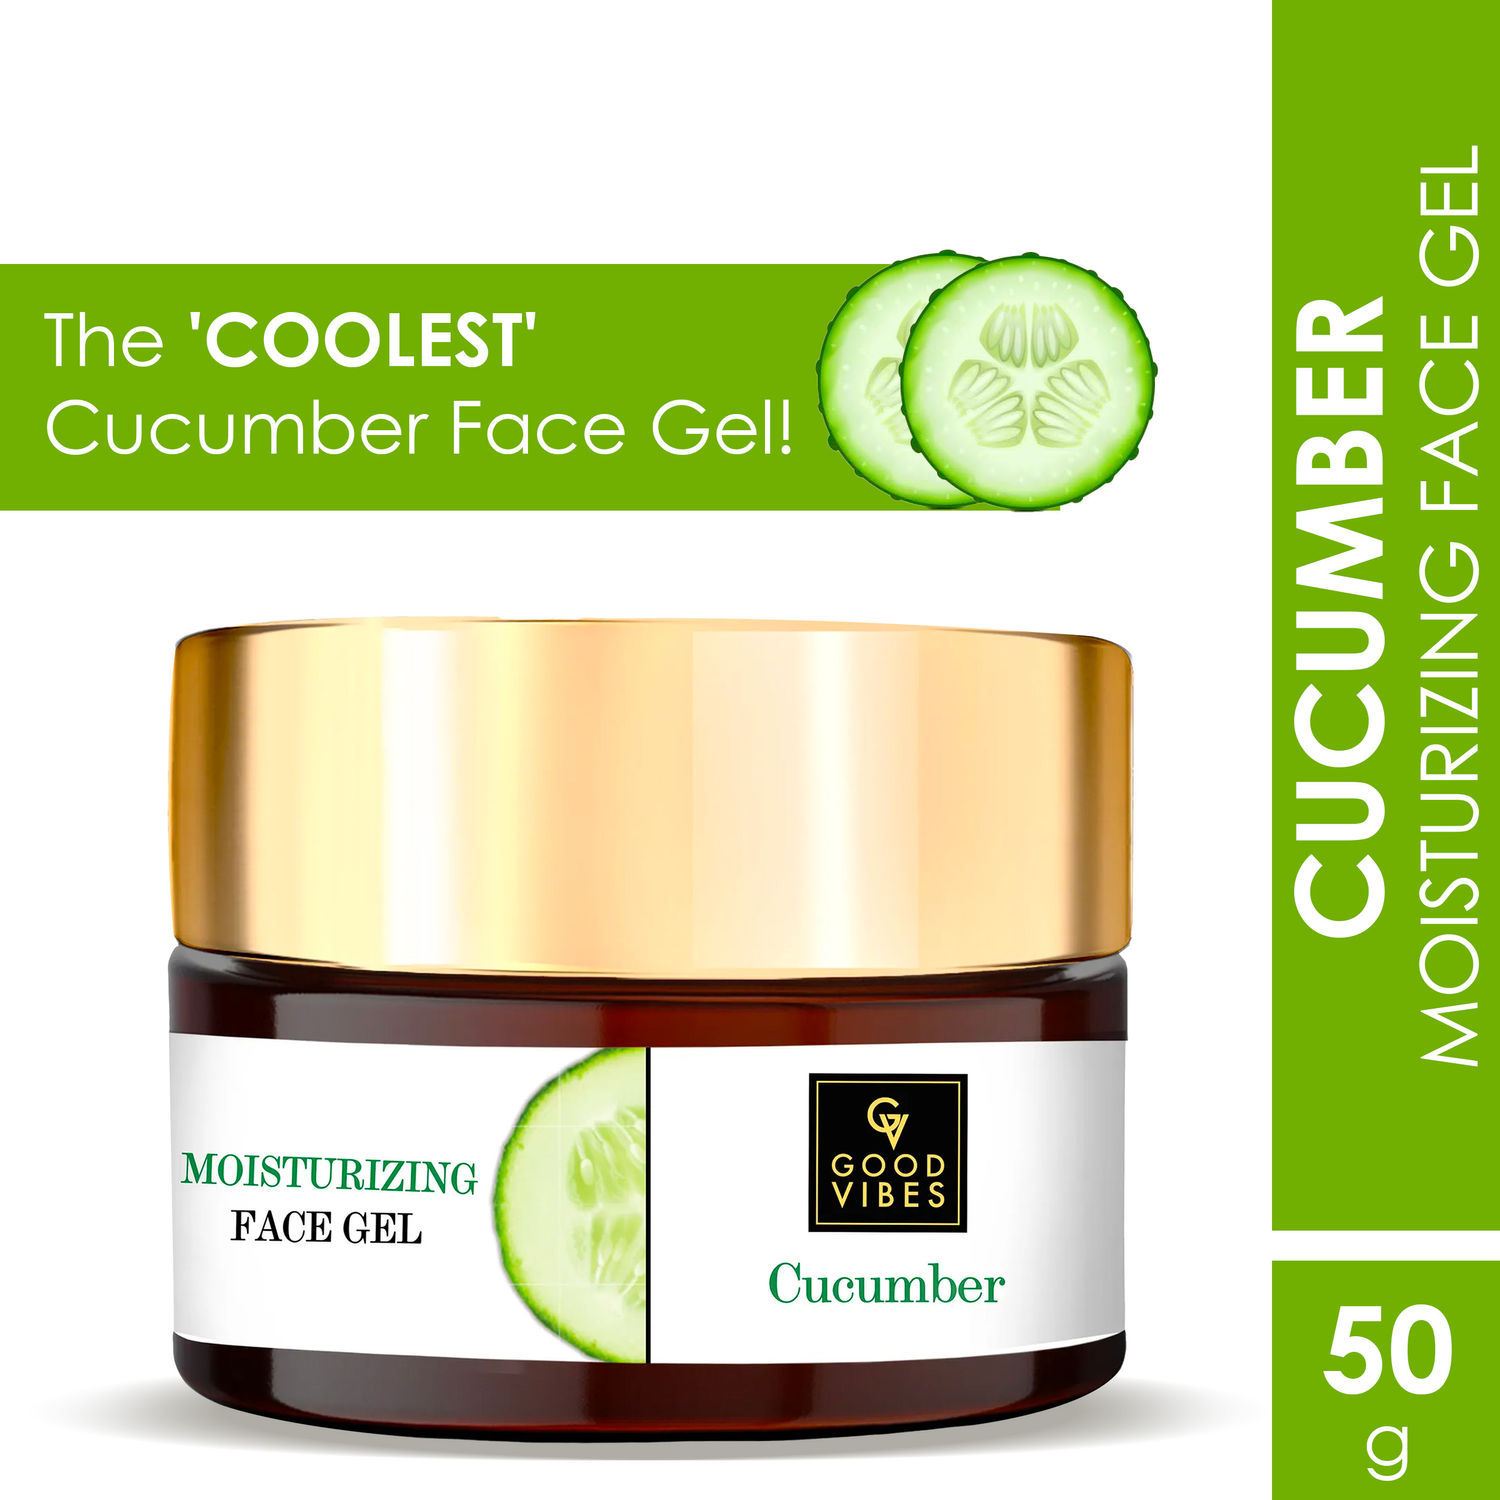 Buy Good Vibes Cucumber Moisturizing Face Gel | Glowing, Cleansing | Cucumber | No Parabens, No Sulphates, No Mineral Oil, No Animal Testing (50 g) - Purplle